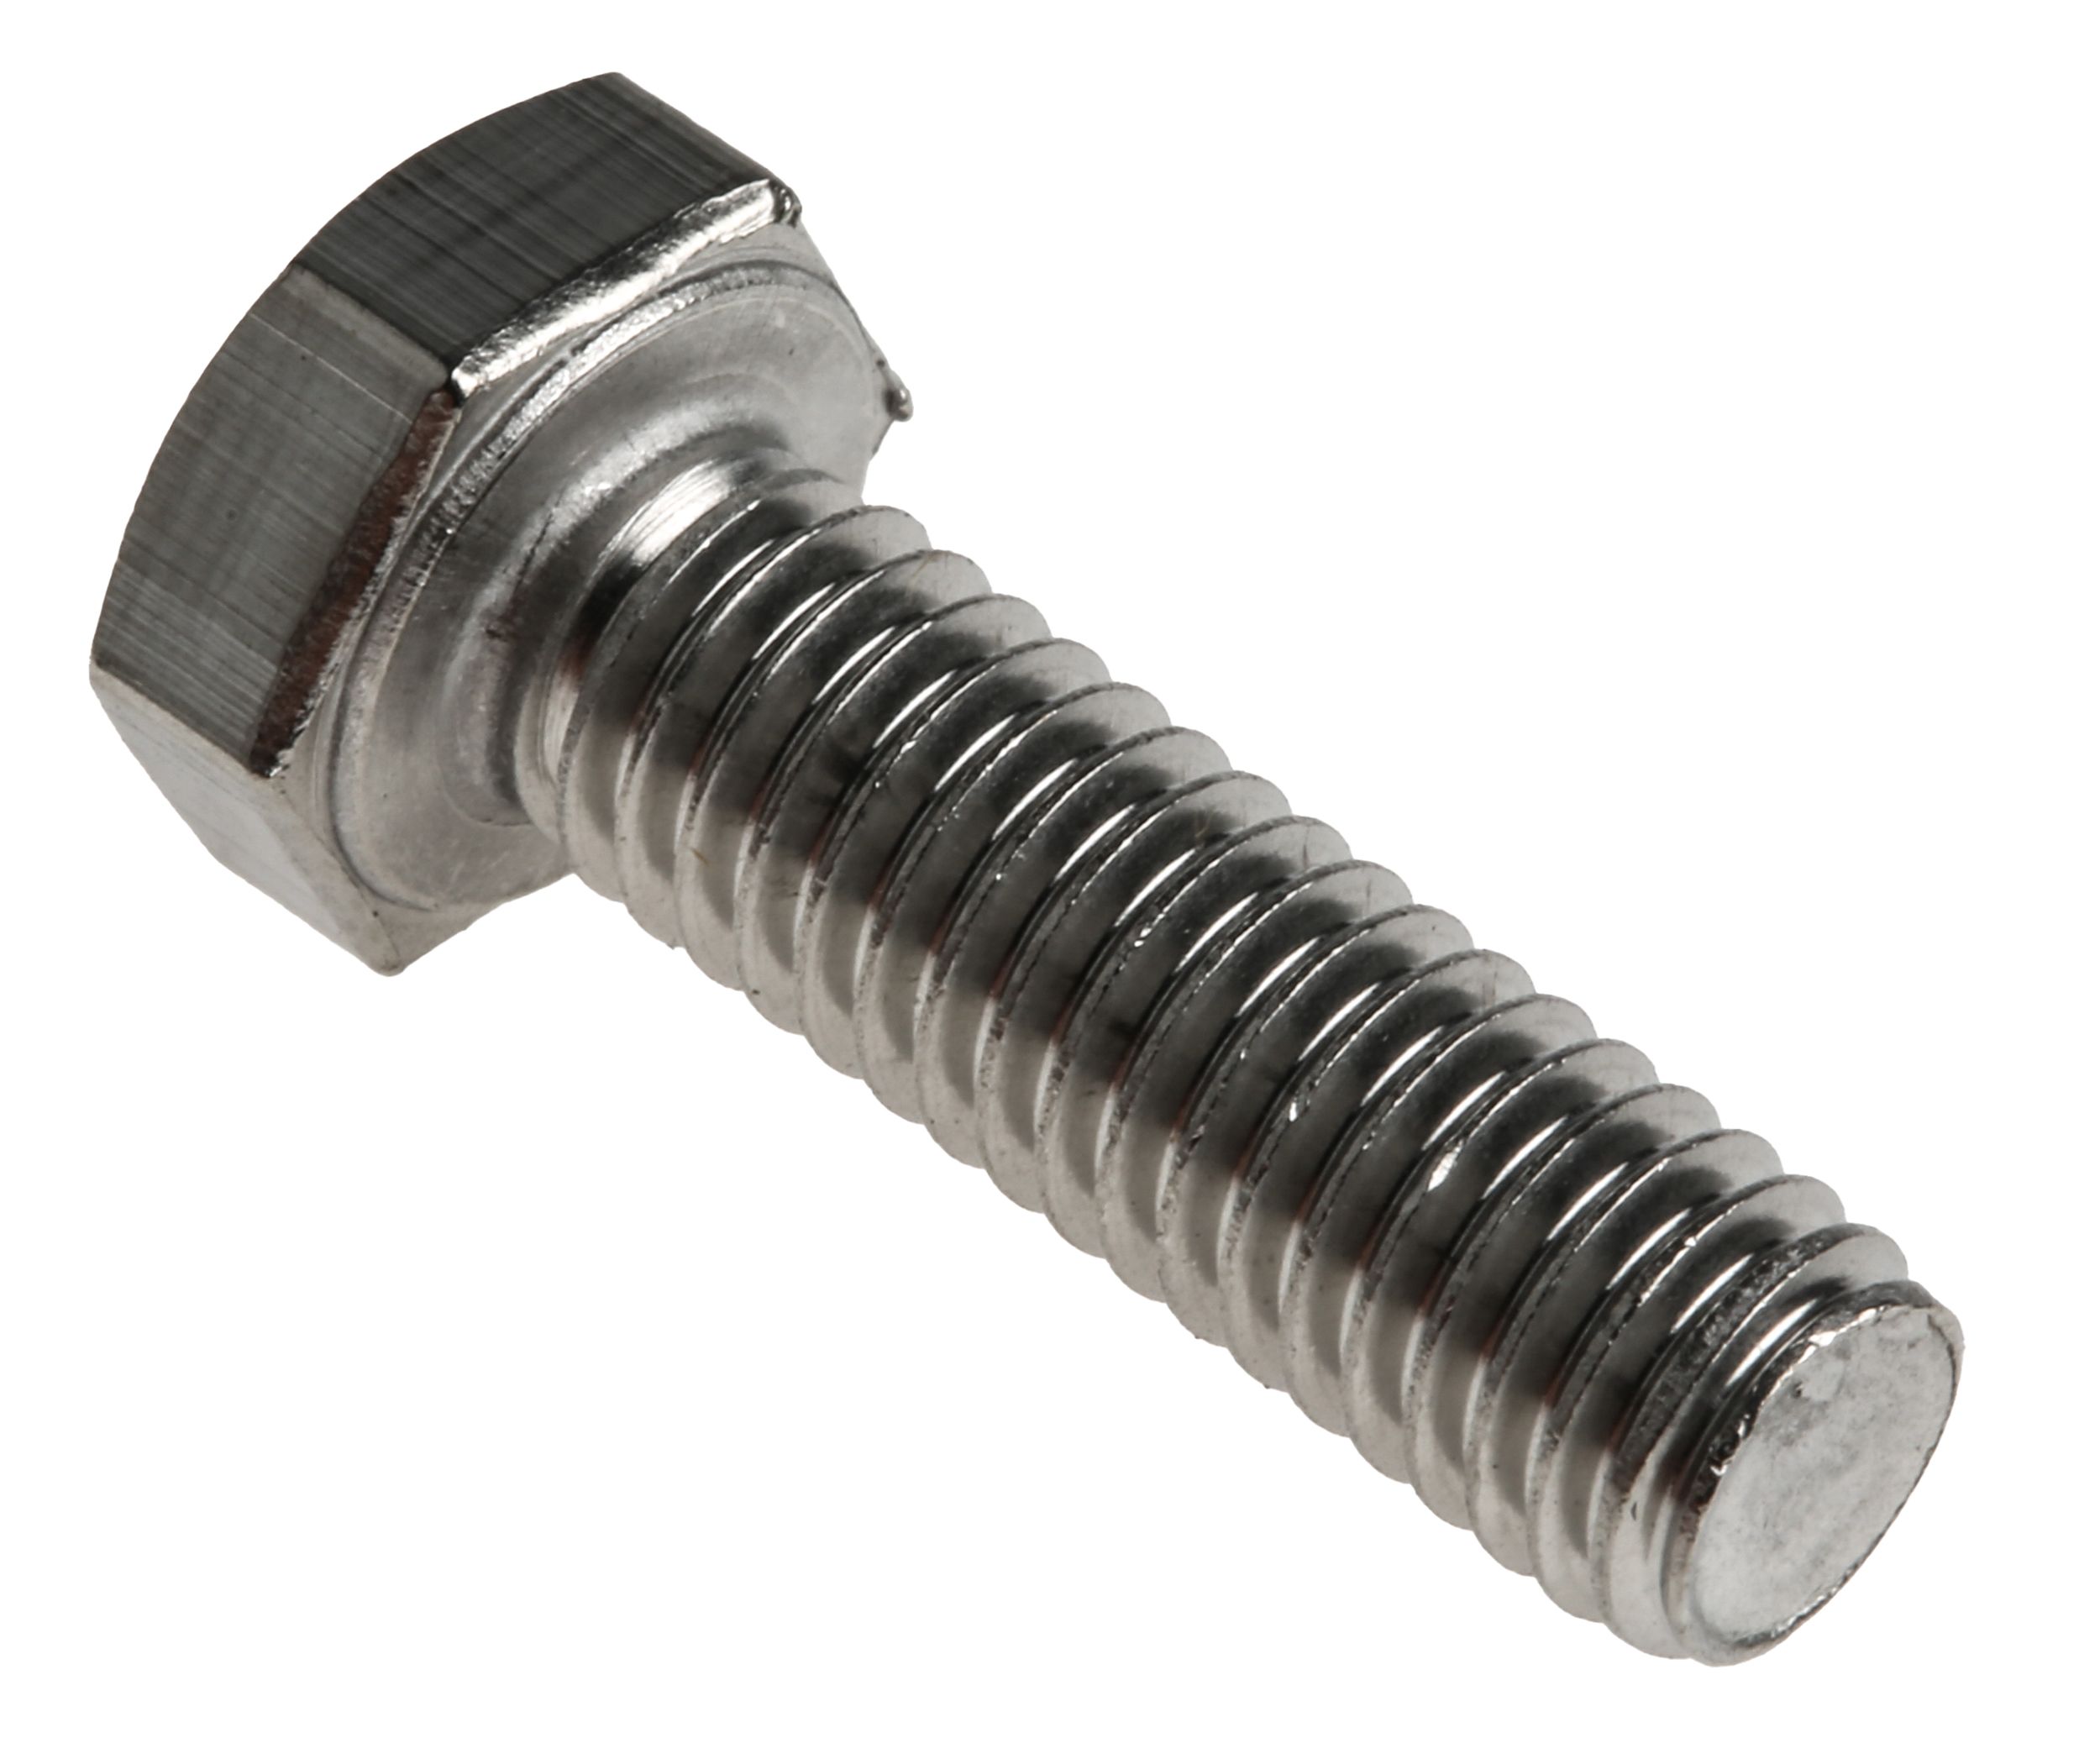 Plain Stainless Steel Hex, Hex Bolt, M6 x 20mm